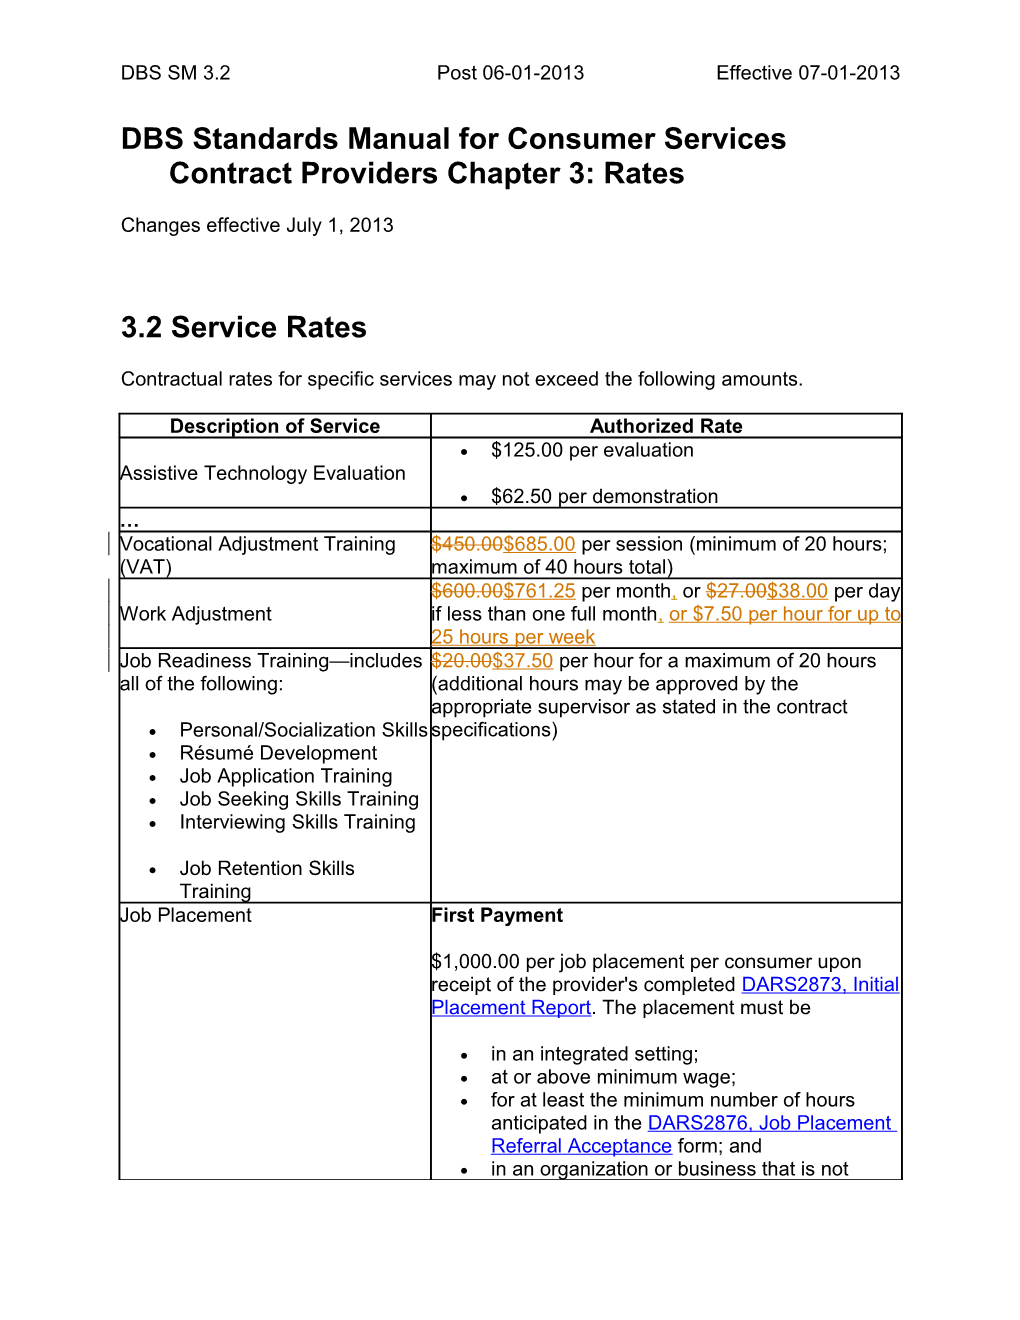 DBS Standards Manual for Consumer Services Contract Providers Chapter 3 Revisions, July 2013